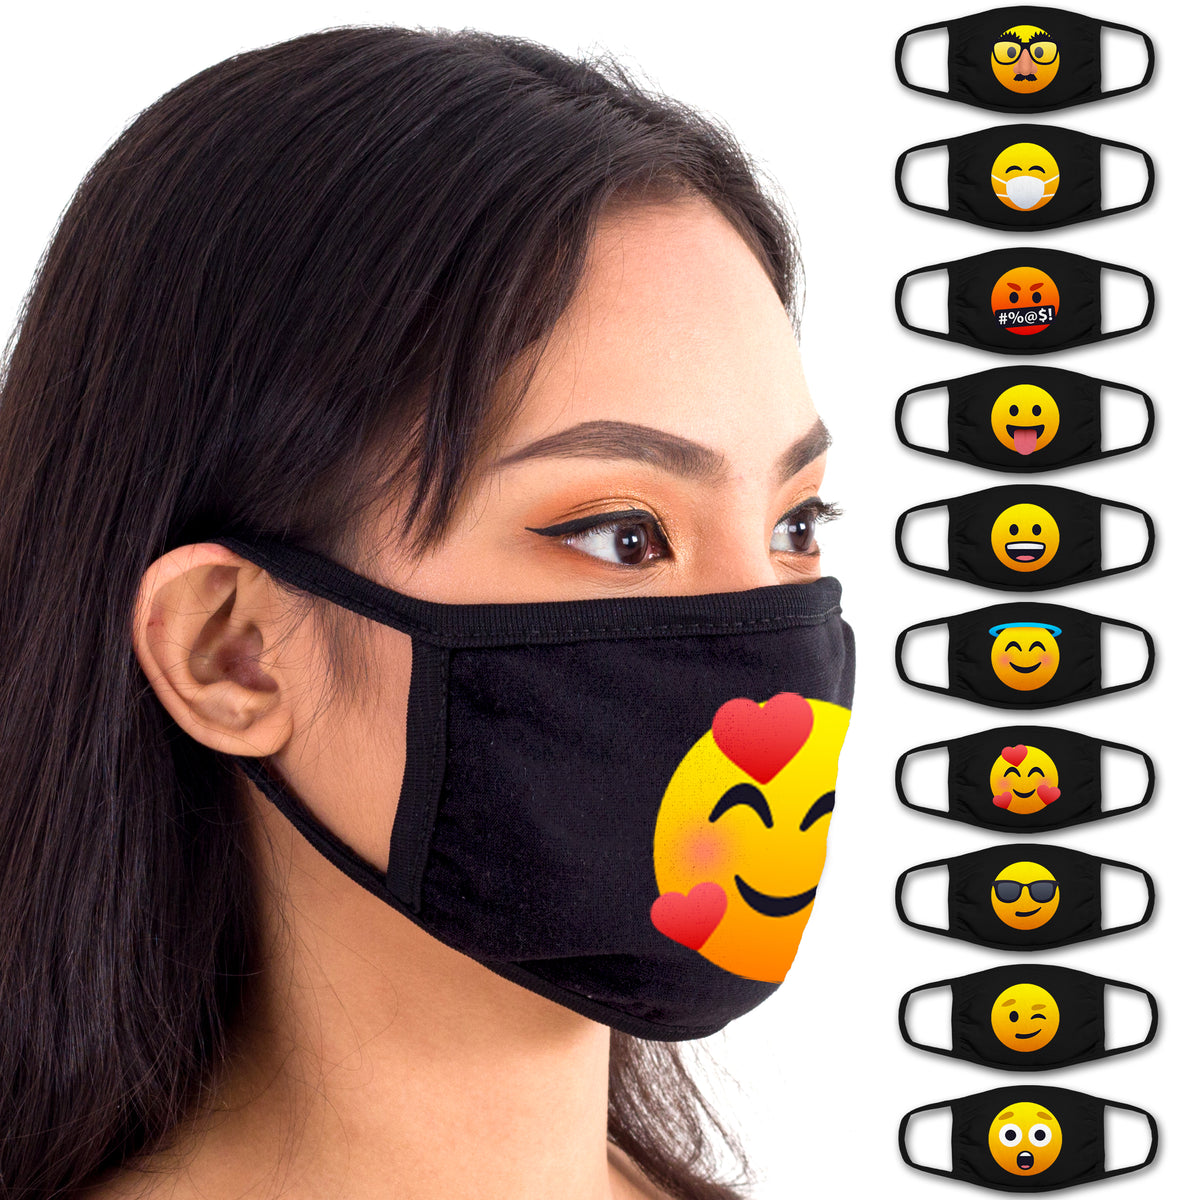 Face Mouth Mask - Cotton Face Covering (10 Pack - Emoticon)